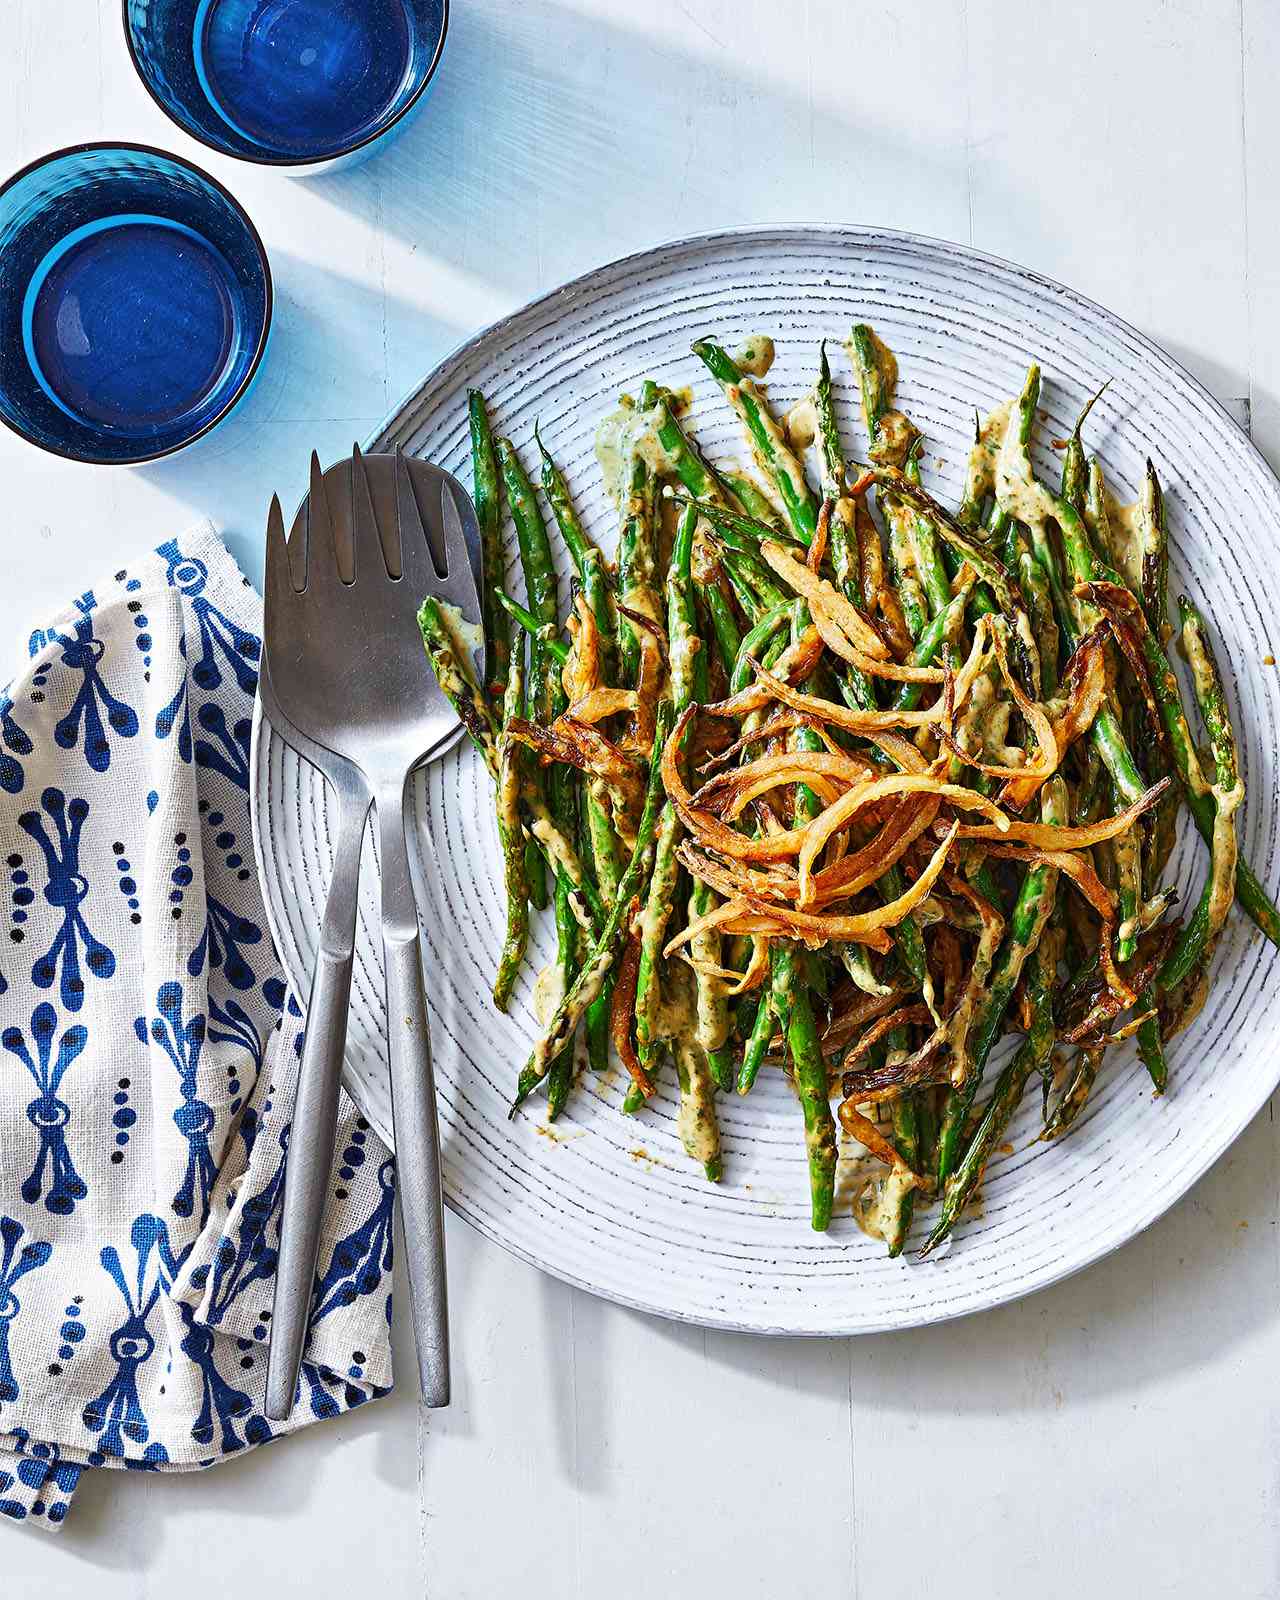 Blistered Green Beans with Fried Onions and Basil-Mushroom Cream